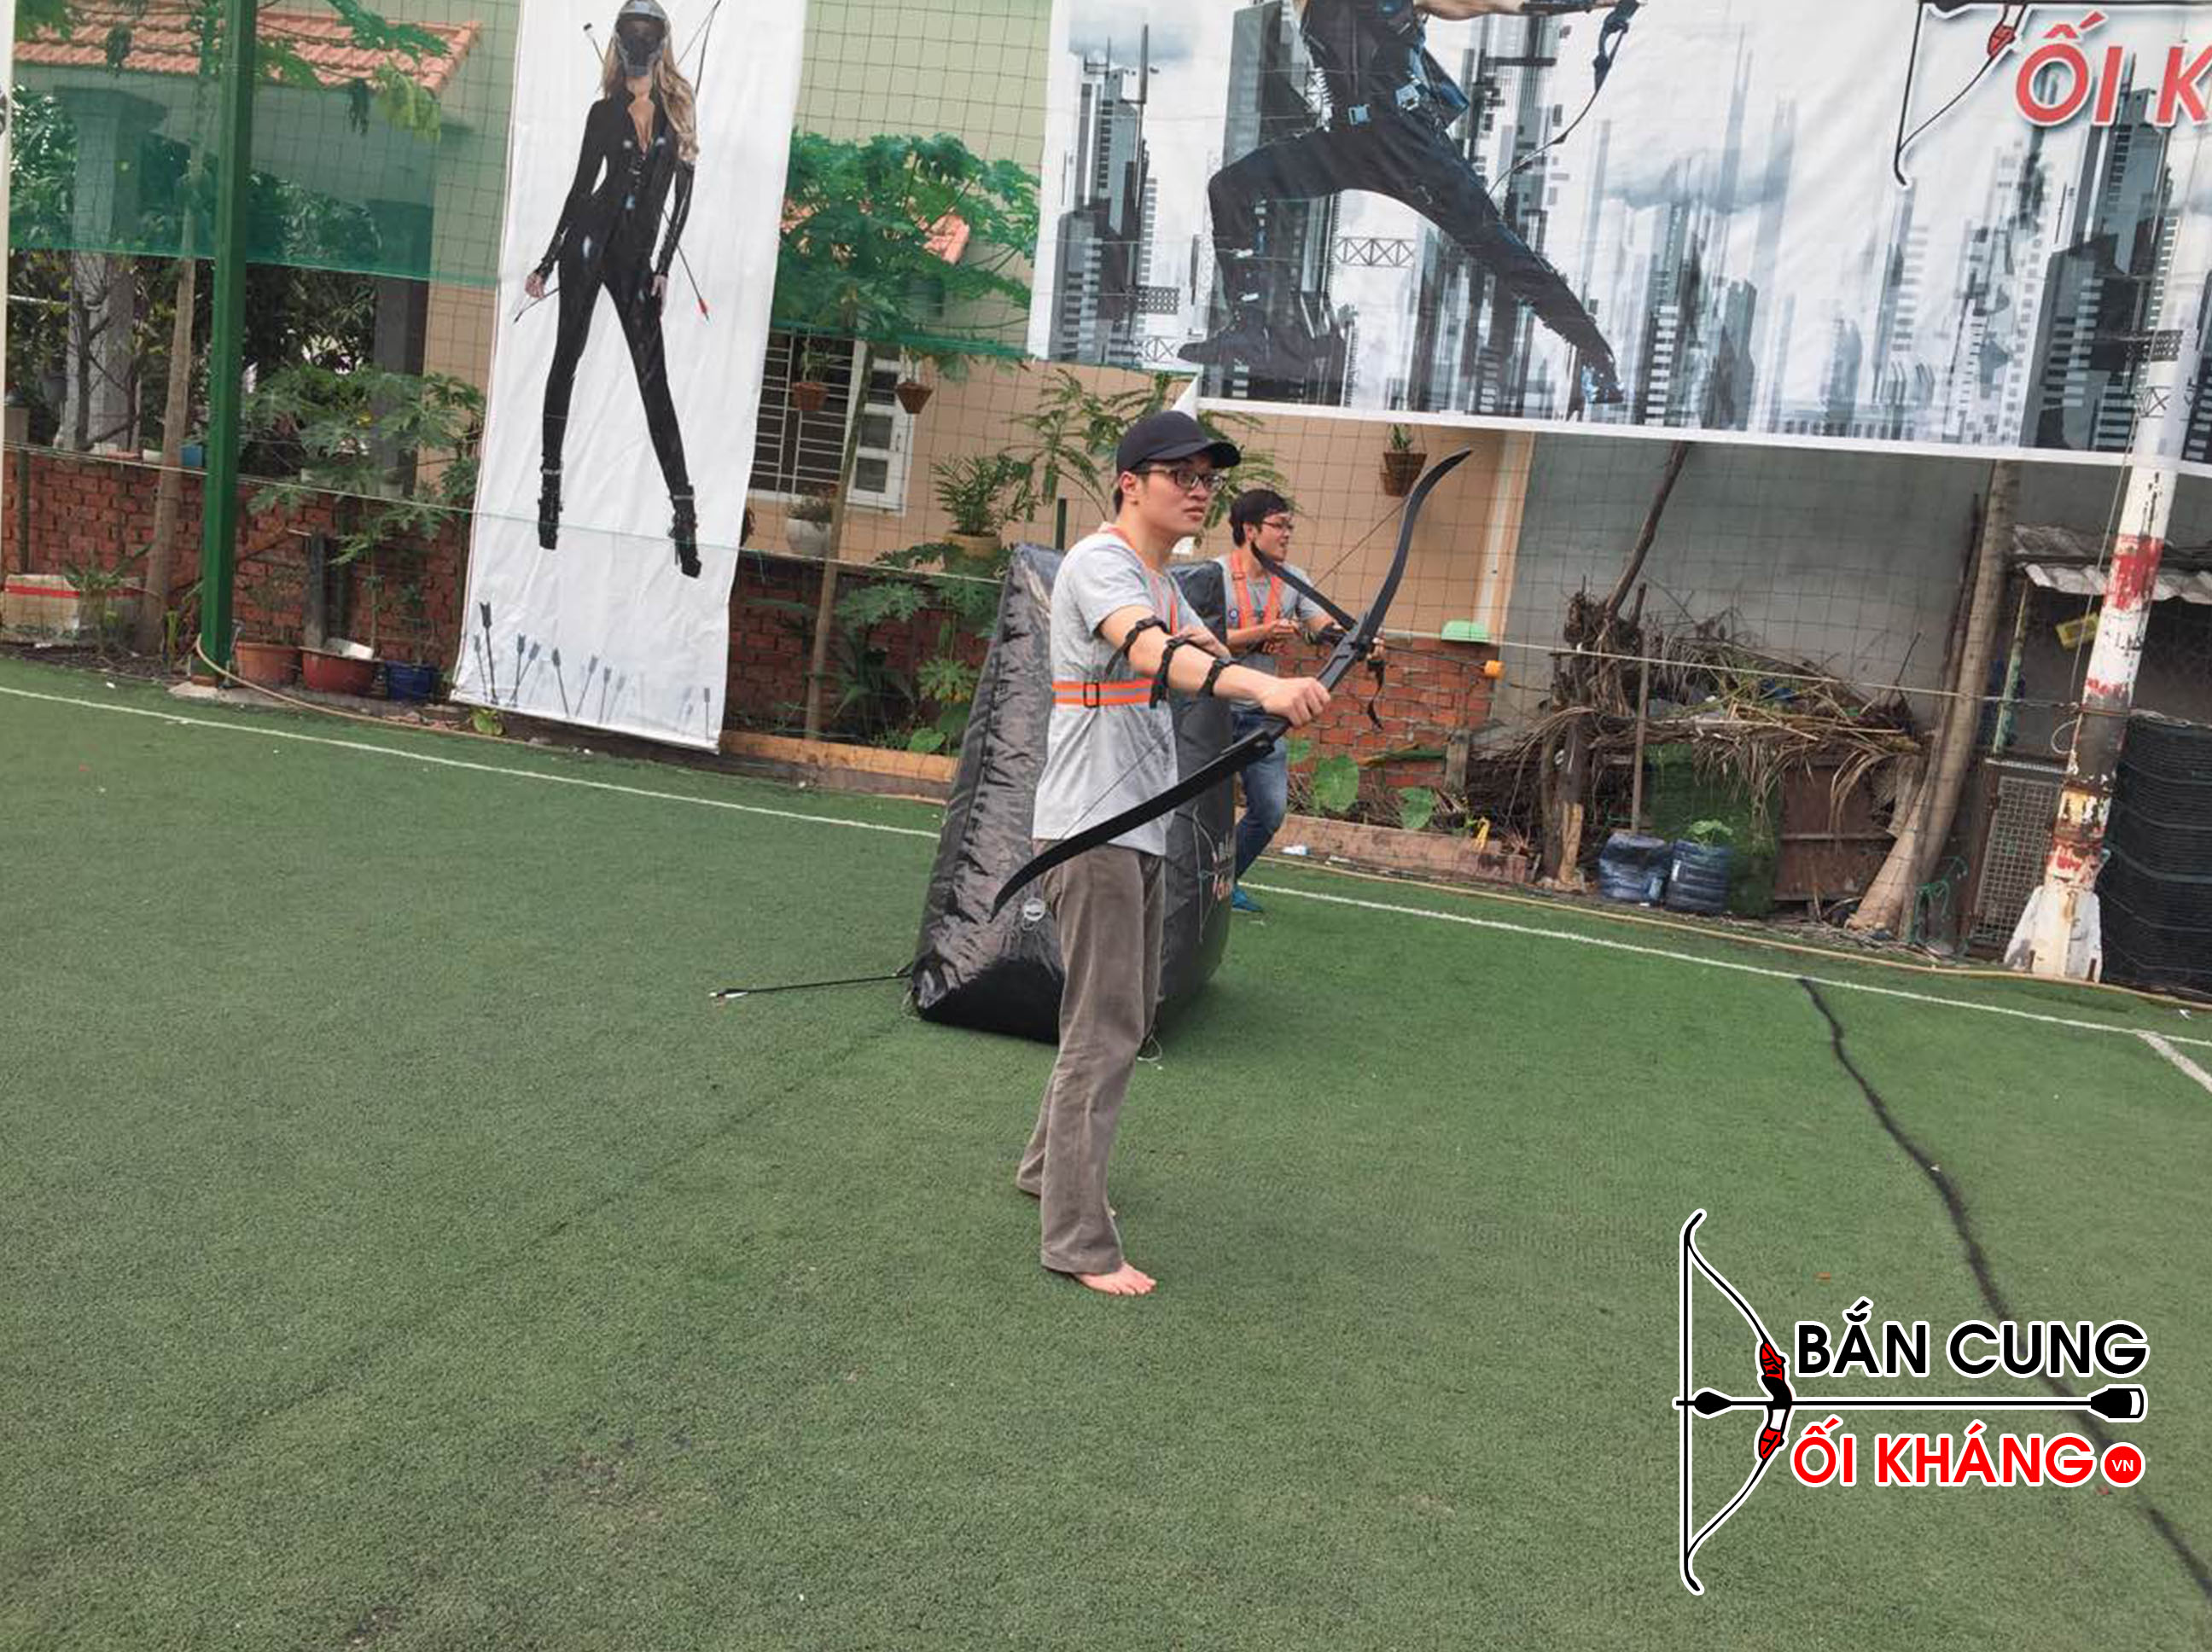 Archery Tag Moments of Nga (ONSOLVE VietNam) - 02/02/2018